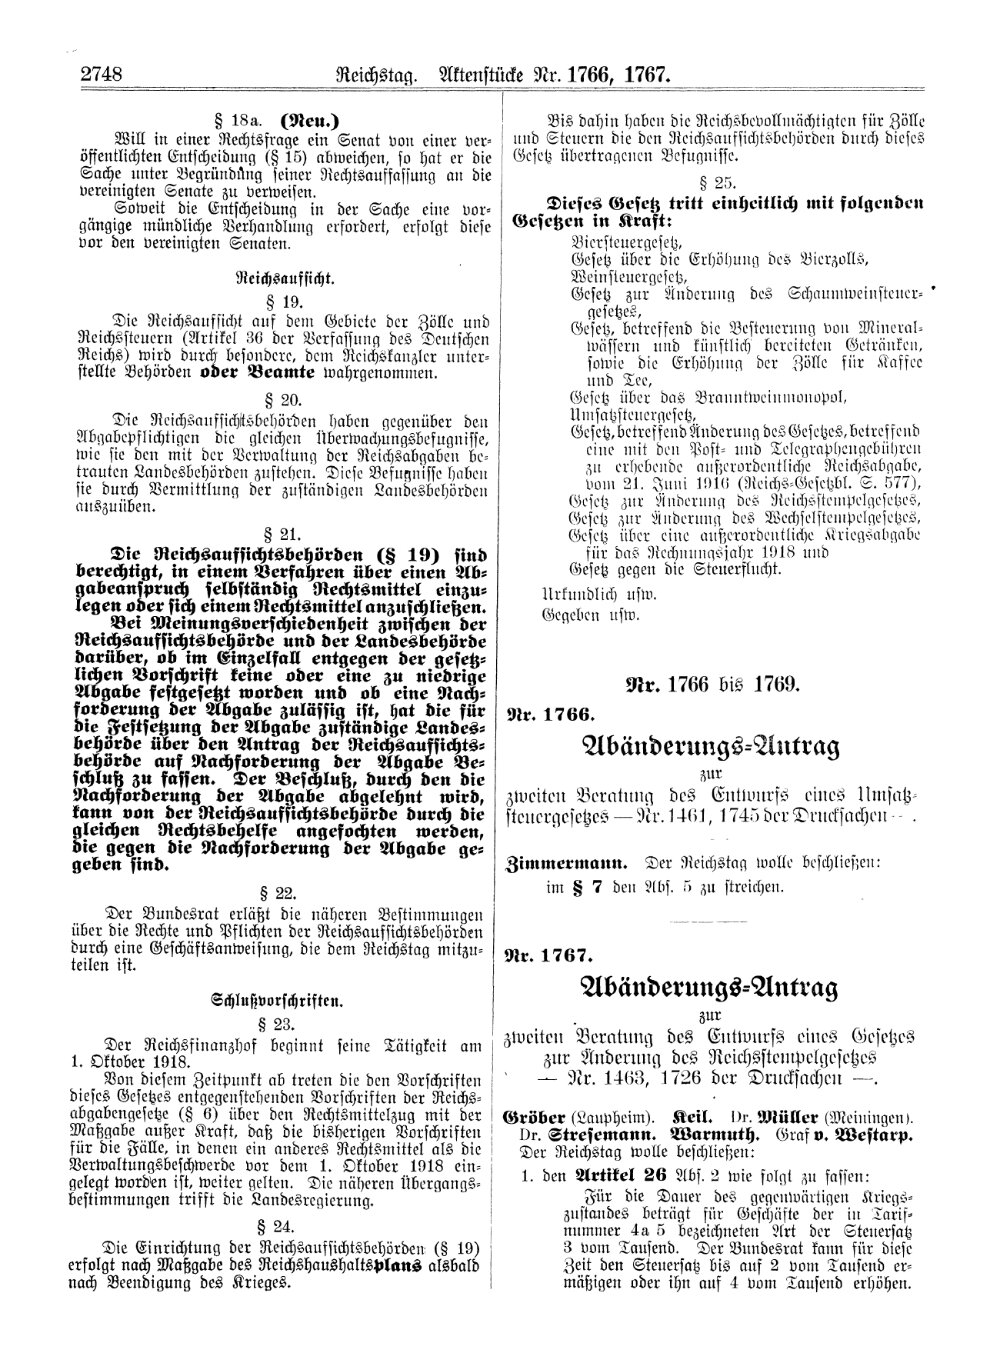 Scan of page 2748